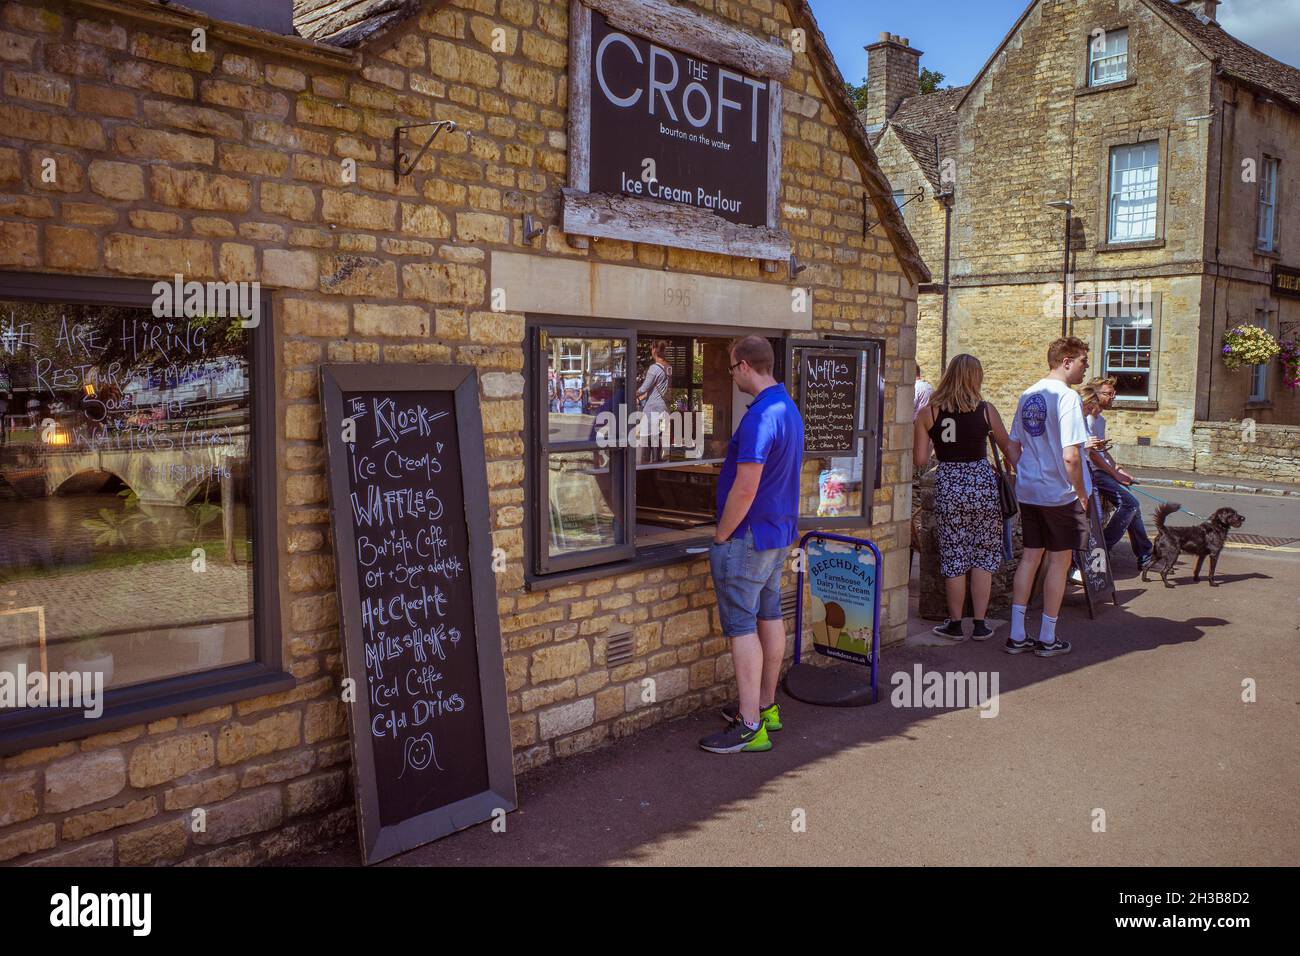 A customer buying refreshments at an ice cream parlour on a hot summer's day in Bourton On The Water. A picturesque village in the Cotswolds, UK. Stock Photo